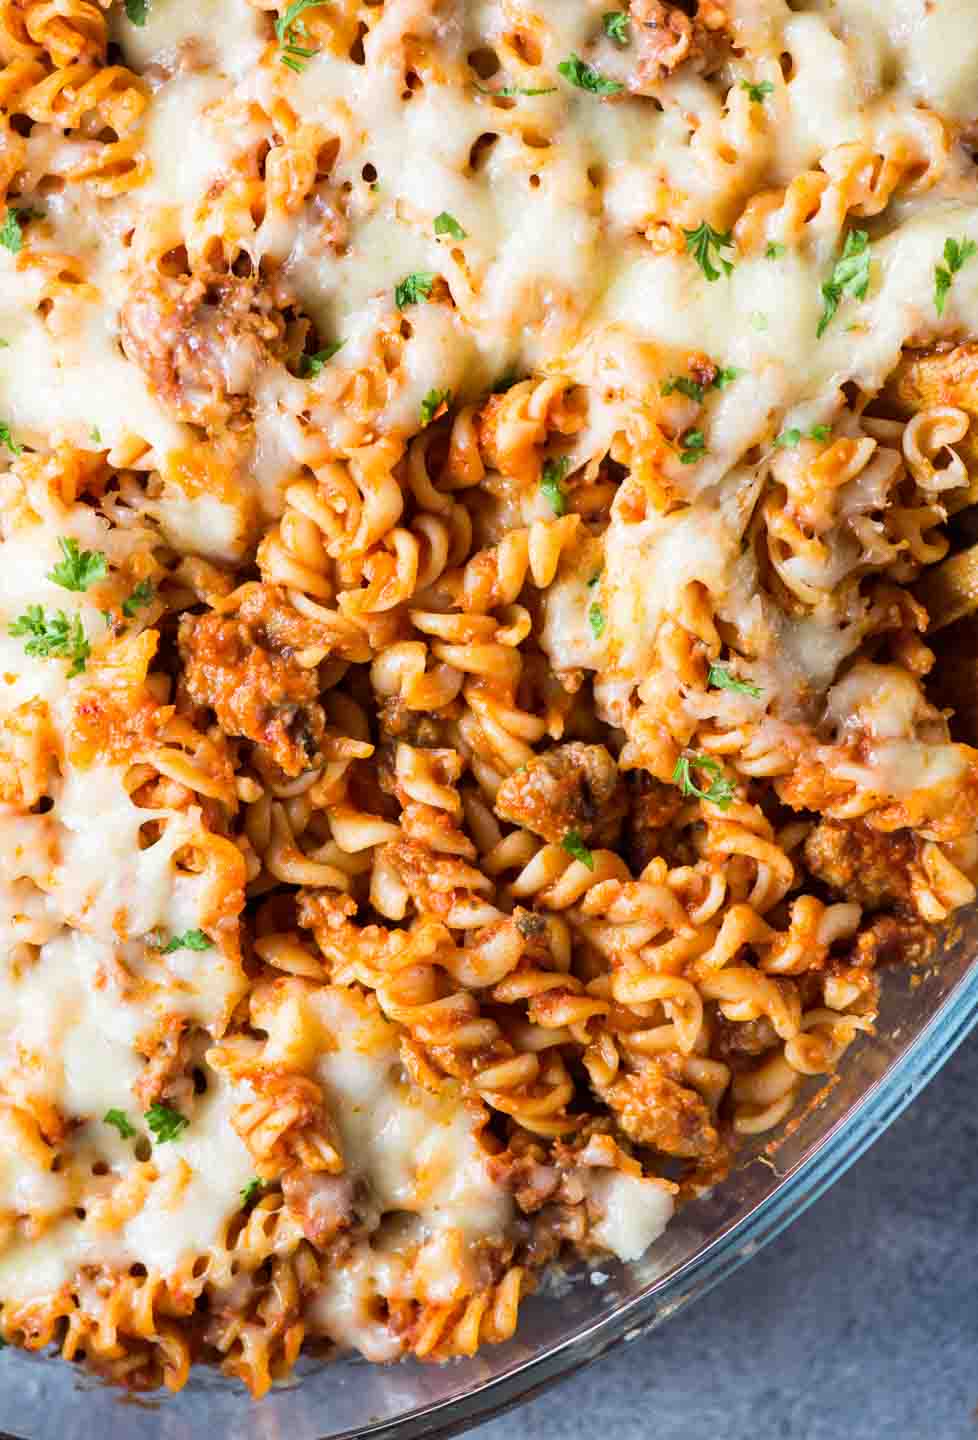 Chessy Pasta Bake With Sausage - The flavours of kitchen